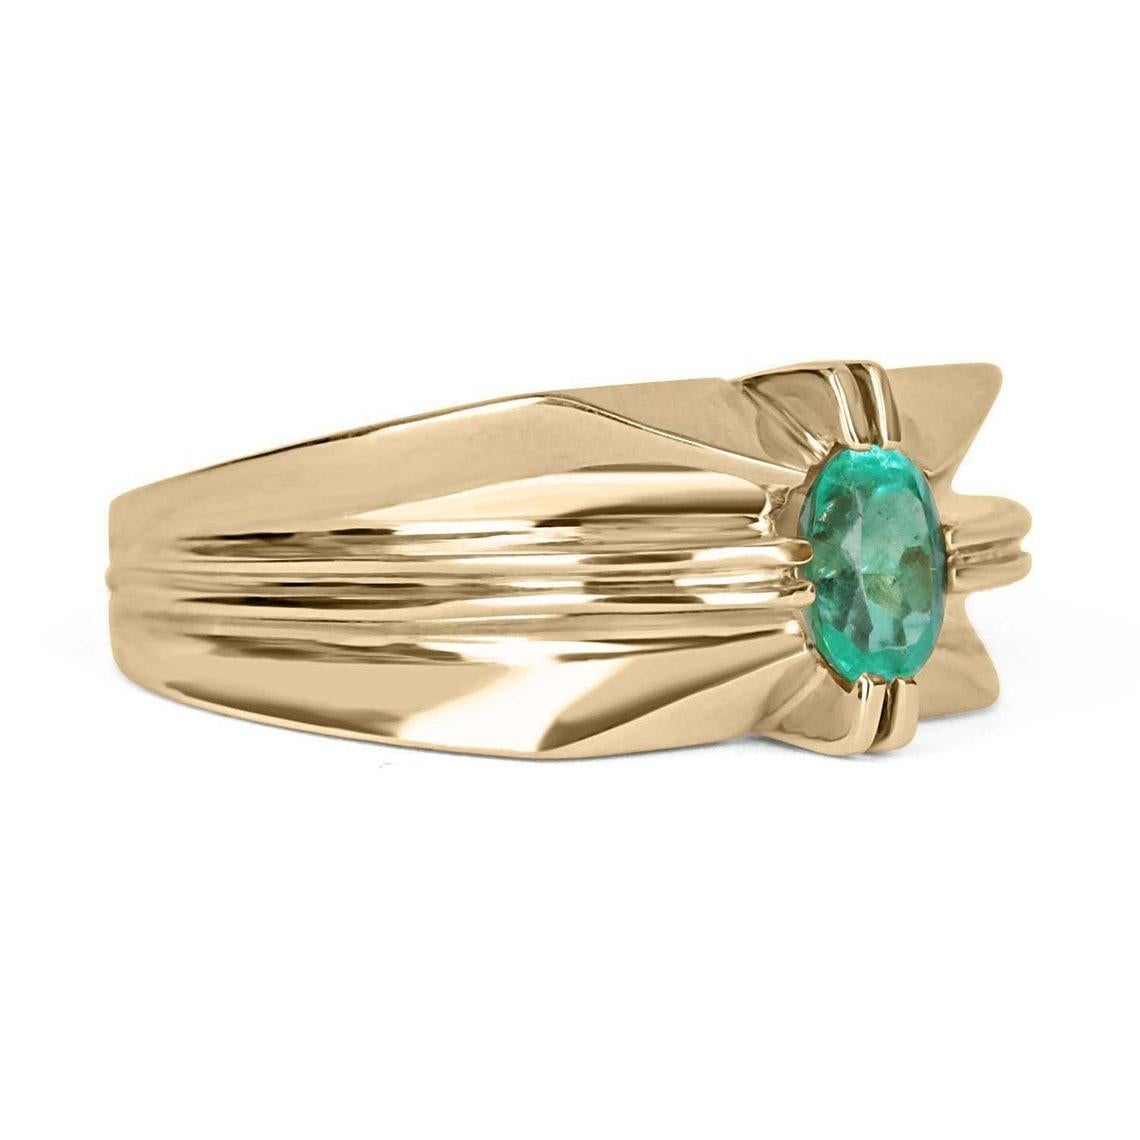 Setting Style: Bezel Solitaire
Metal Purity: 14K Yellow Gold
Weight: 11.5 Grams

Main Stone: Emerald
Shape: Oval Cut
Approx Estimated Weight: 0.90-carats
Clarity: Transparent
Color: Green
Luster: Excellent-Very Good
Treatment: Natural
Origin: